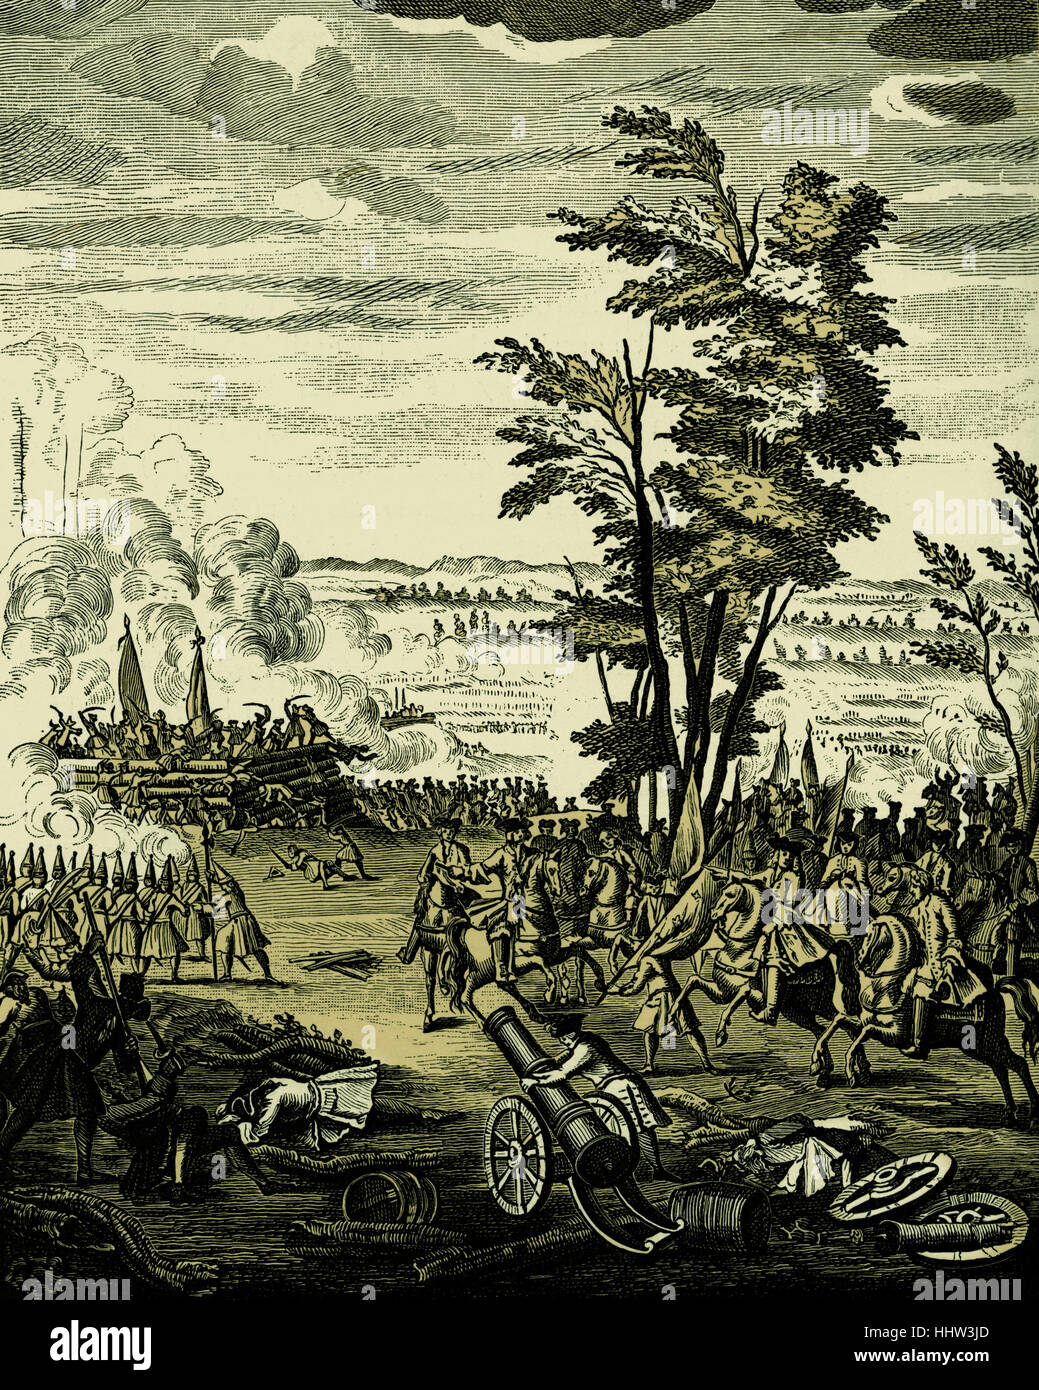 Battle of Malplaquet, 11 September 1709, during War of the Spanish Succession (1701–1714). From 'History of Queen Anne', 1740. Stock Photo